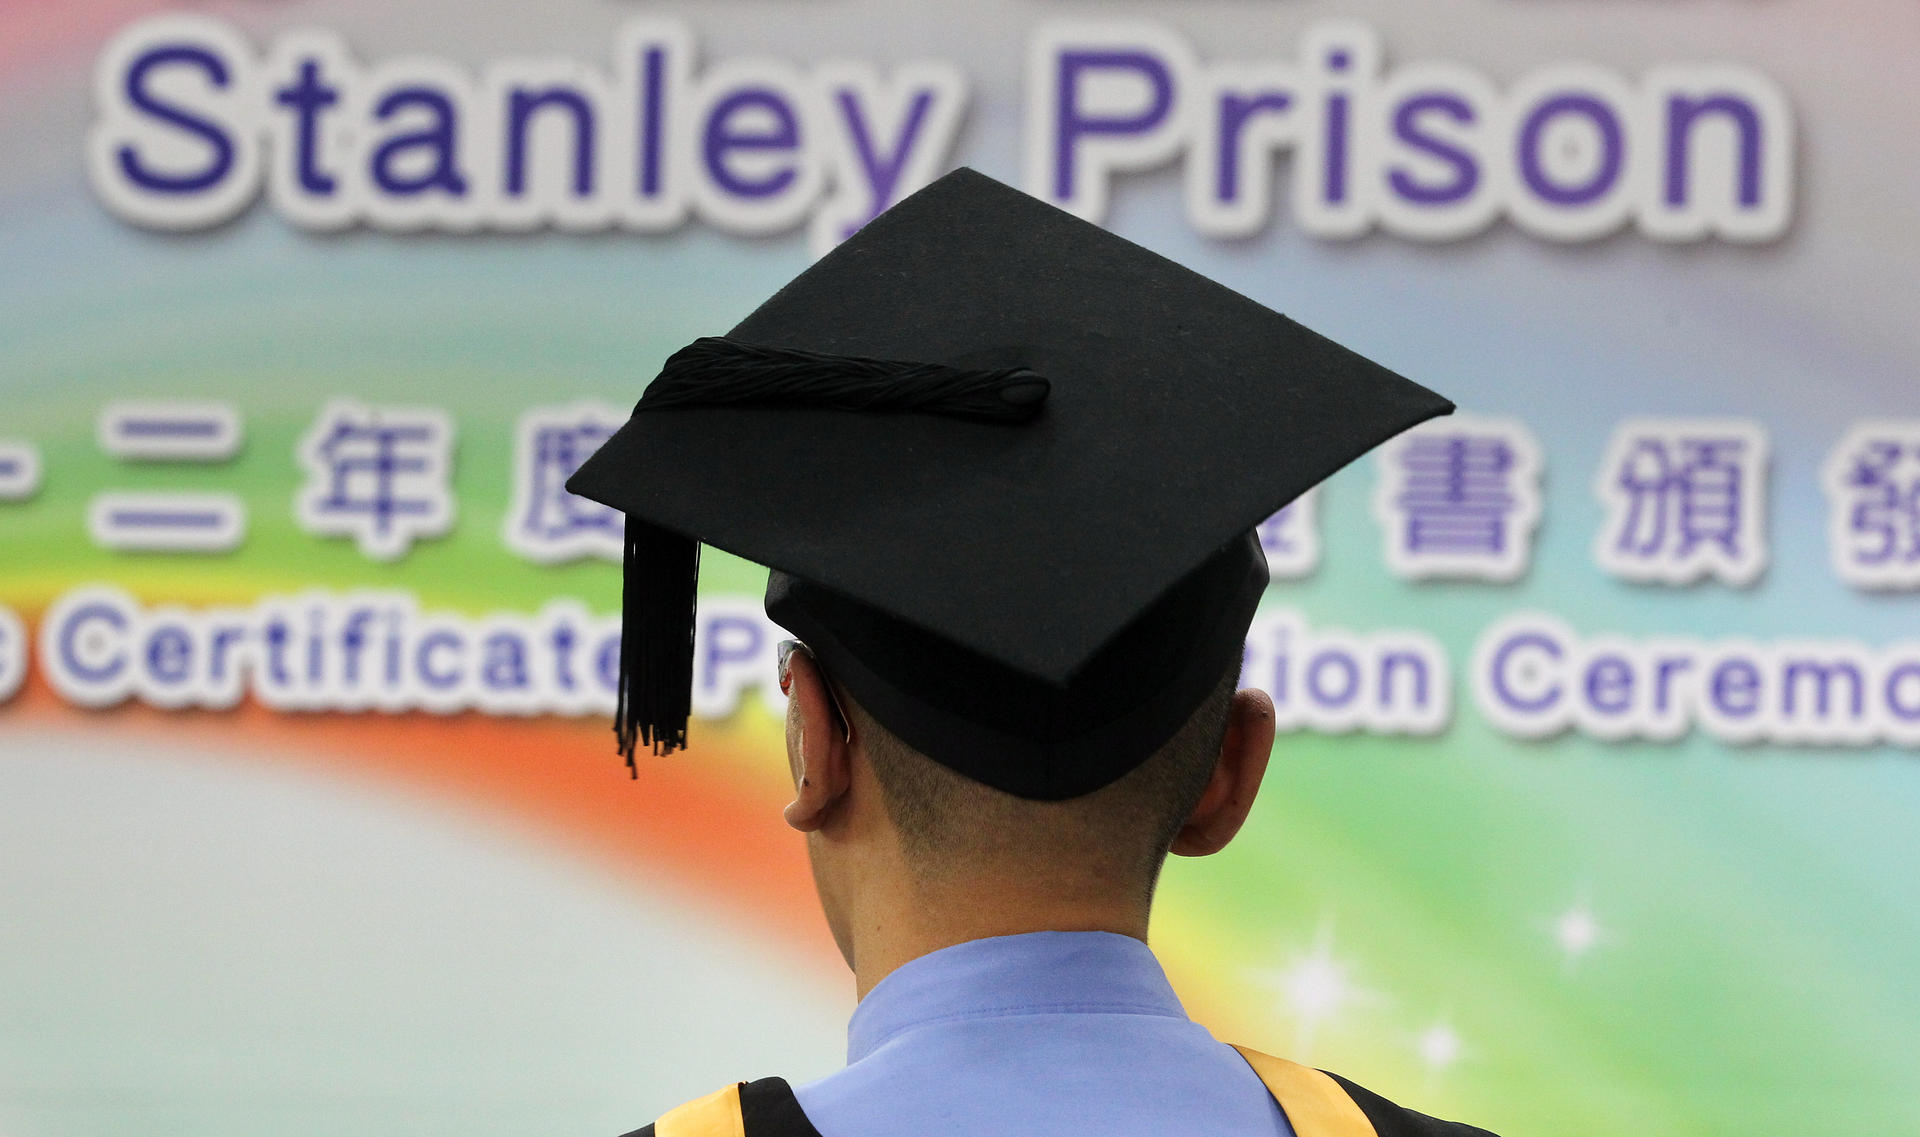 Inmate Kei, 37, received his bachelor’s degree in Stanley Prison yesterday. He was among 97 inmates who were recognised for their academic achievements. Photo: K. Y. Cheng